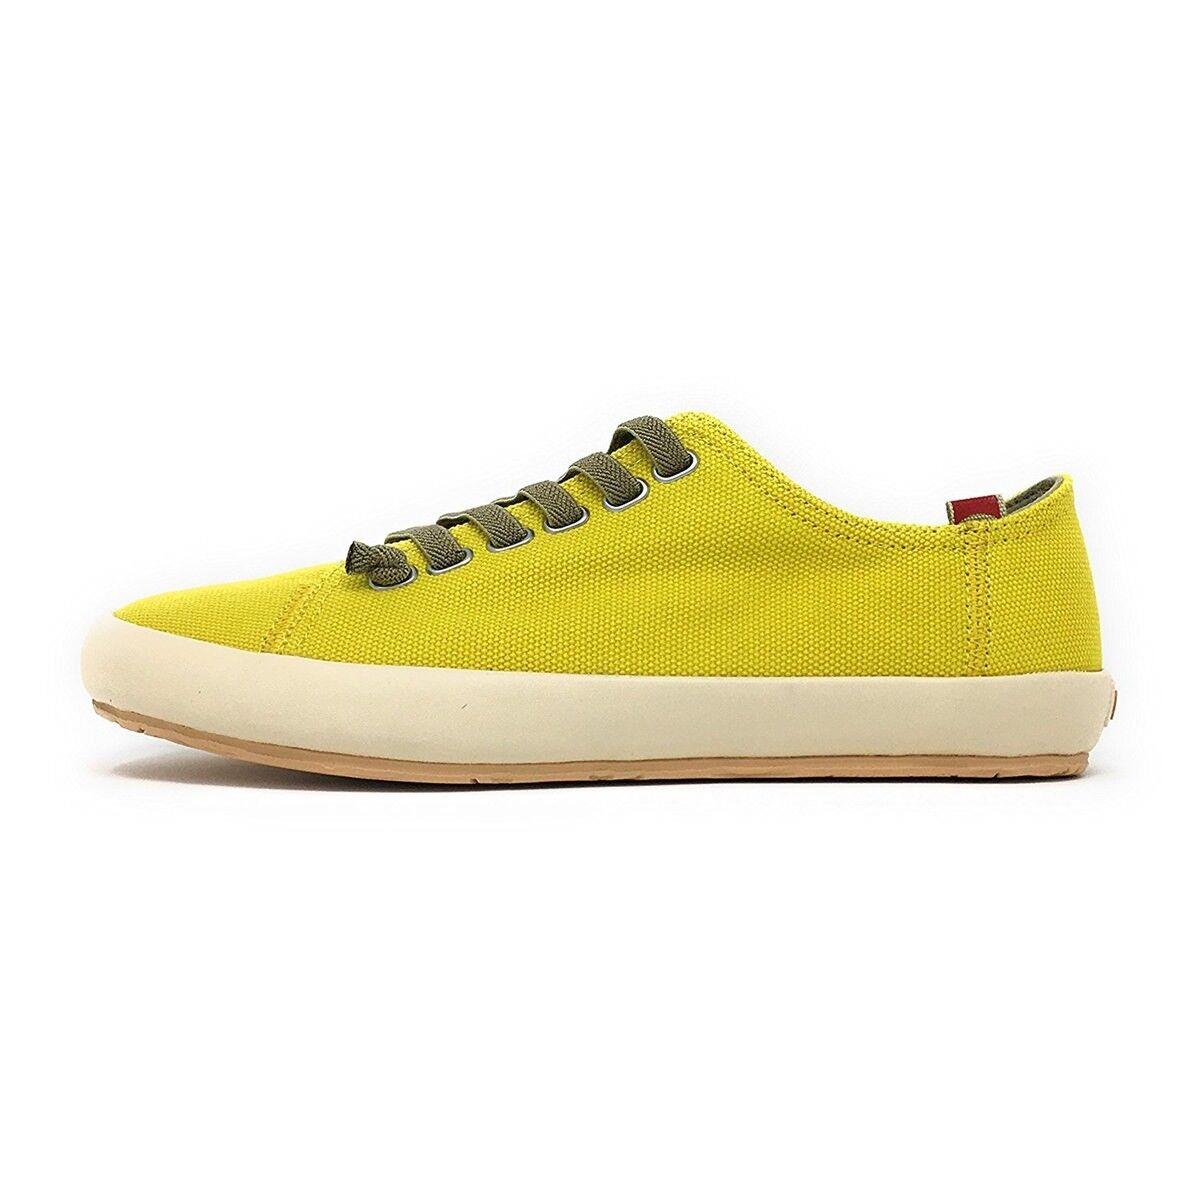 Camper Women Borne Low Top Casual Shoes Comfort Fashion Sneakers Yellow